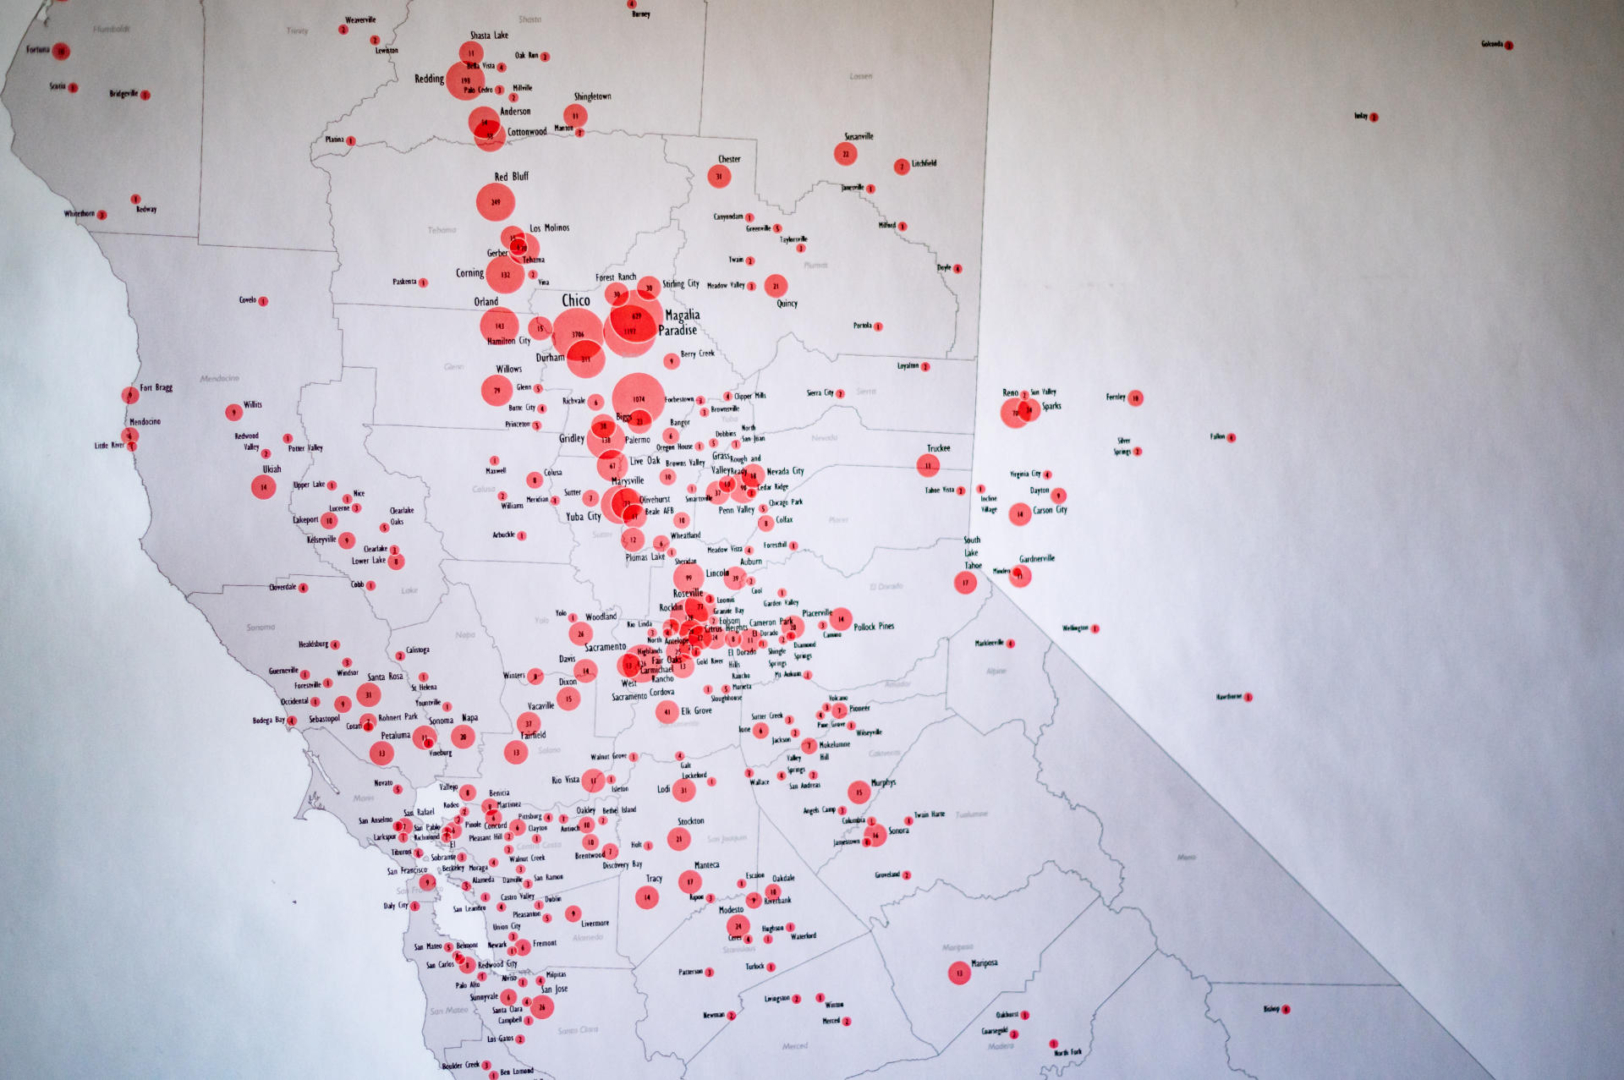 A California map with red circles of different sizes represent population sizes where people have moved to after the Camp Fire.